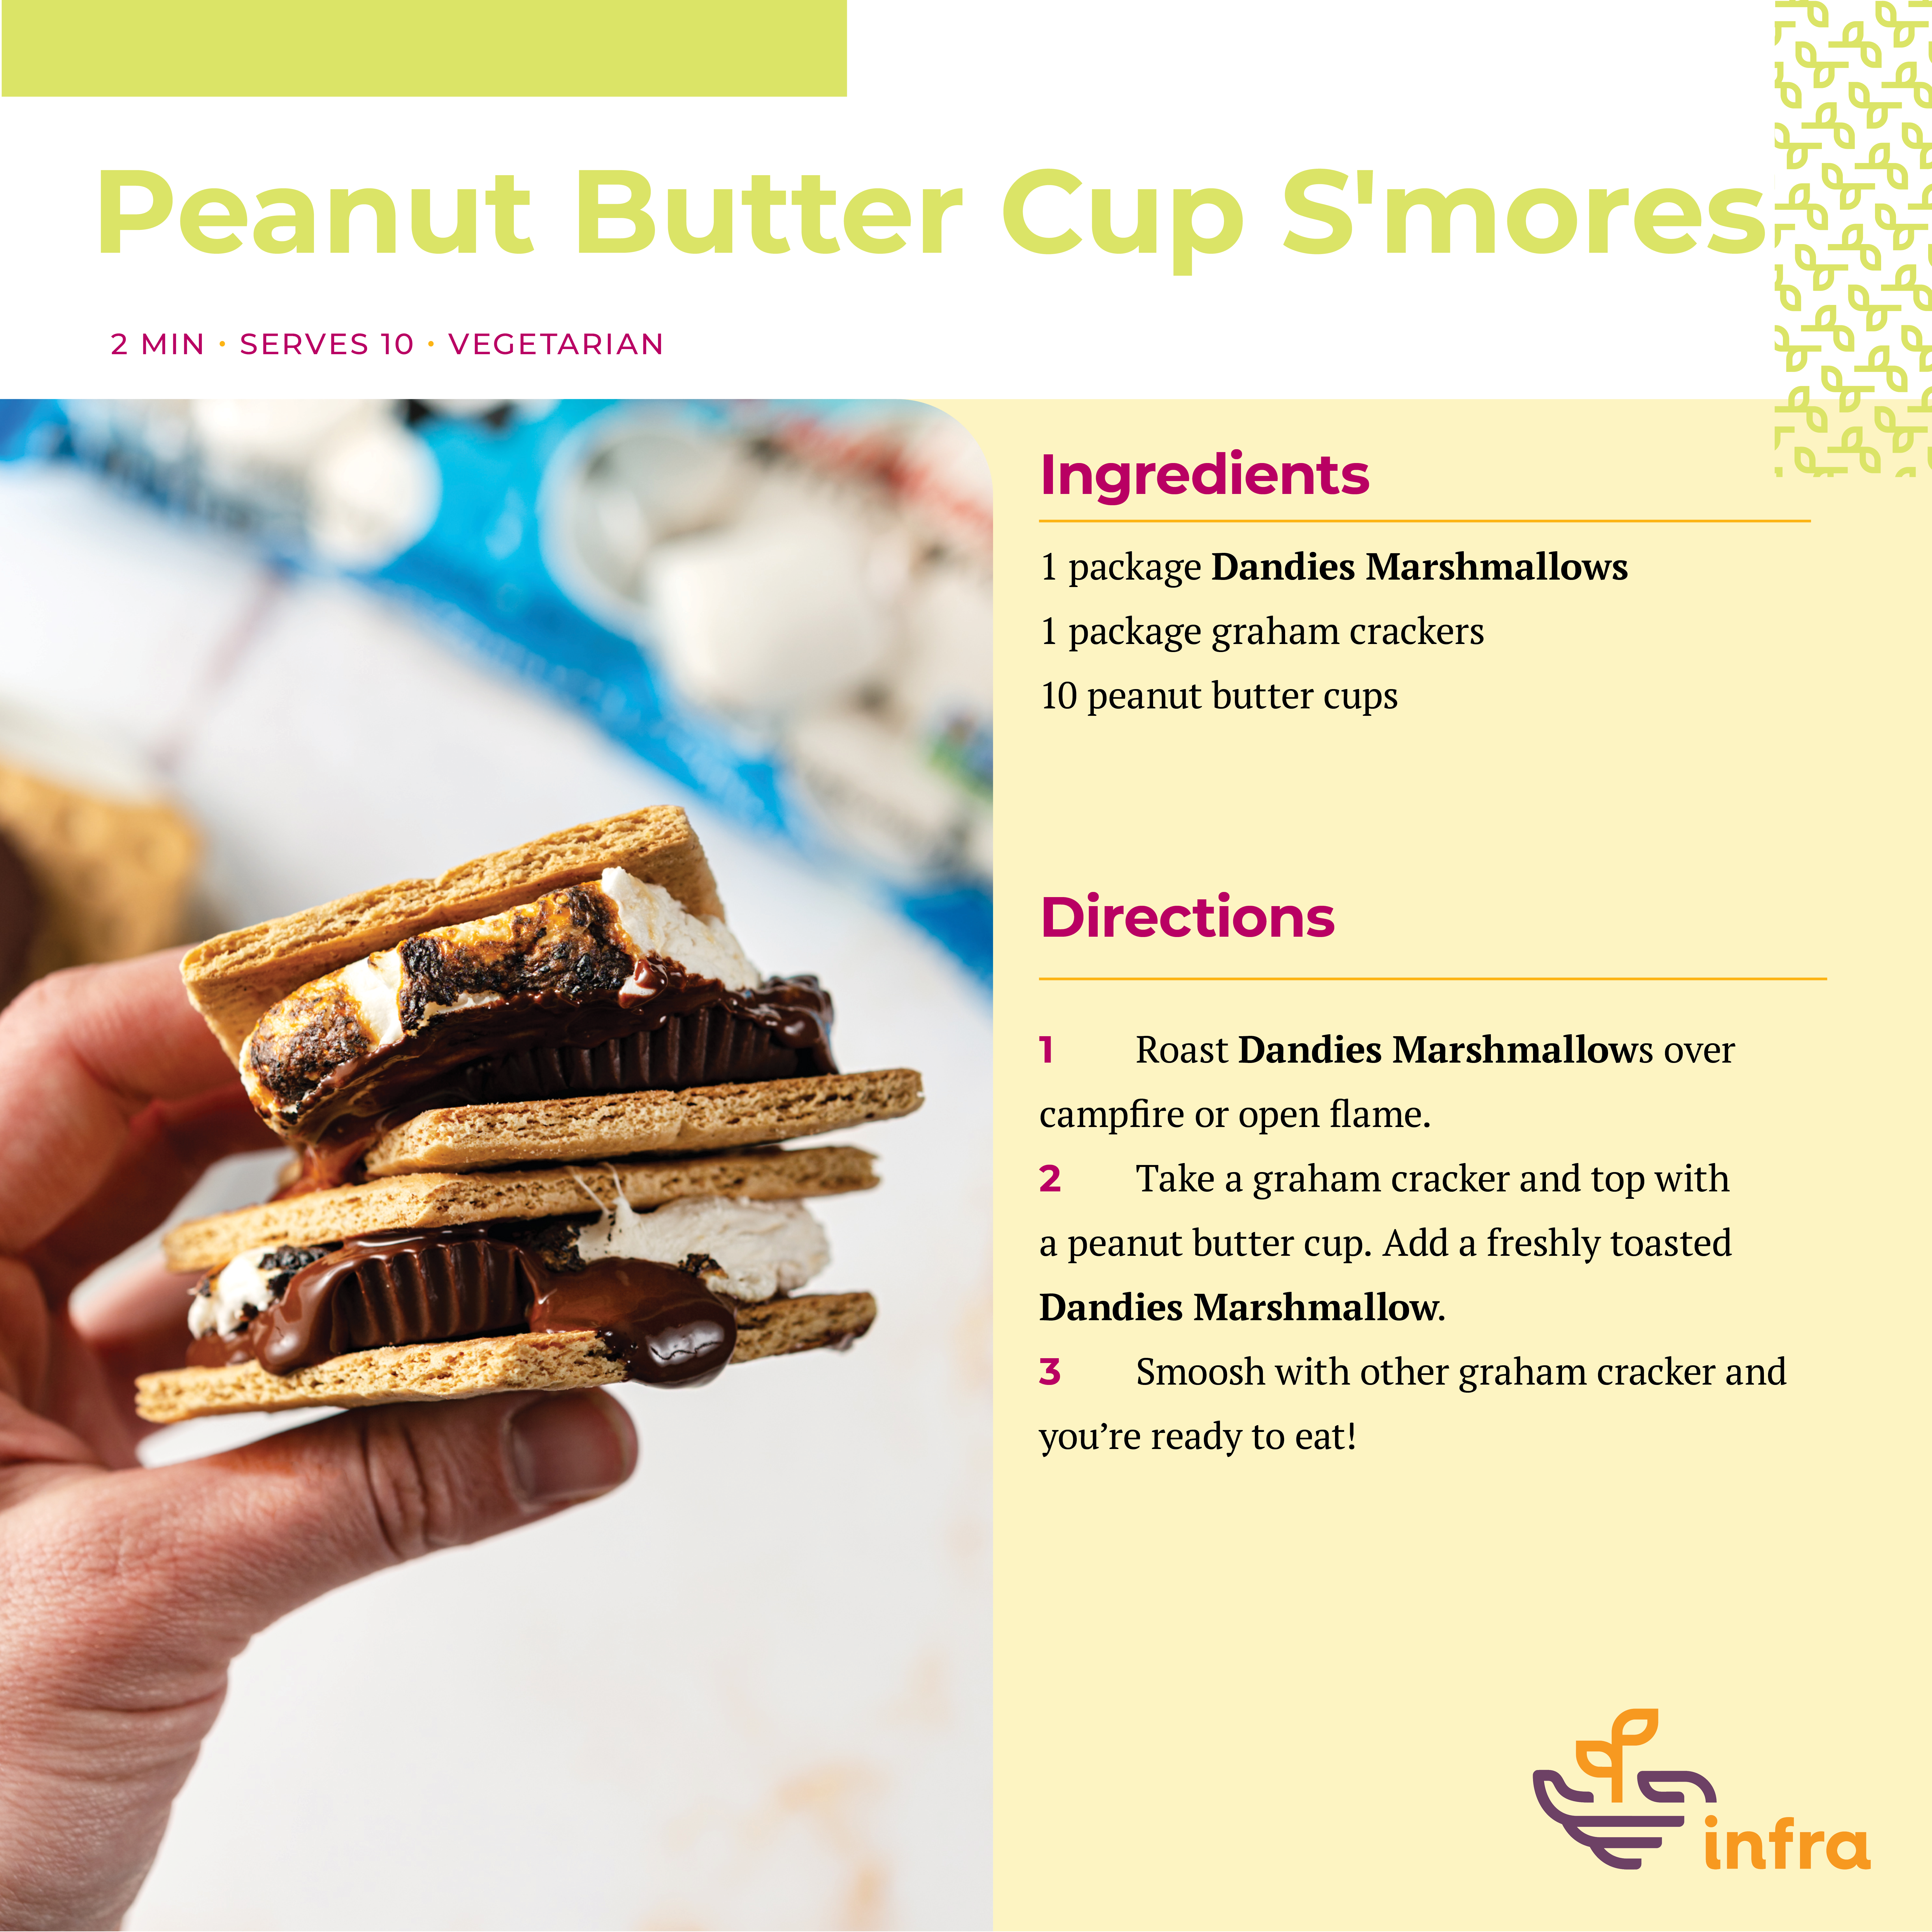 Peanut Butter Cup S'mores